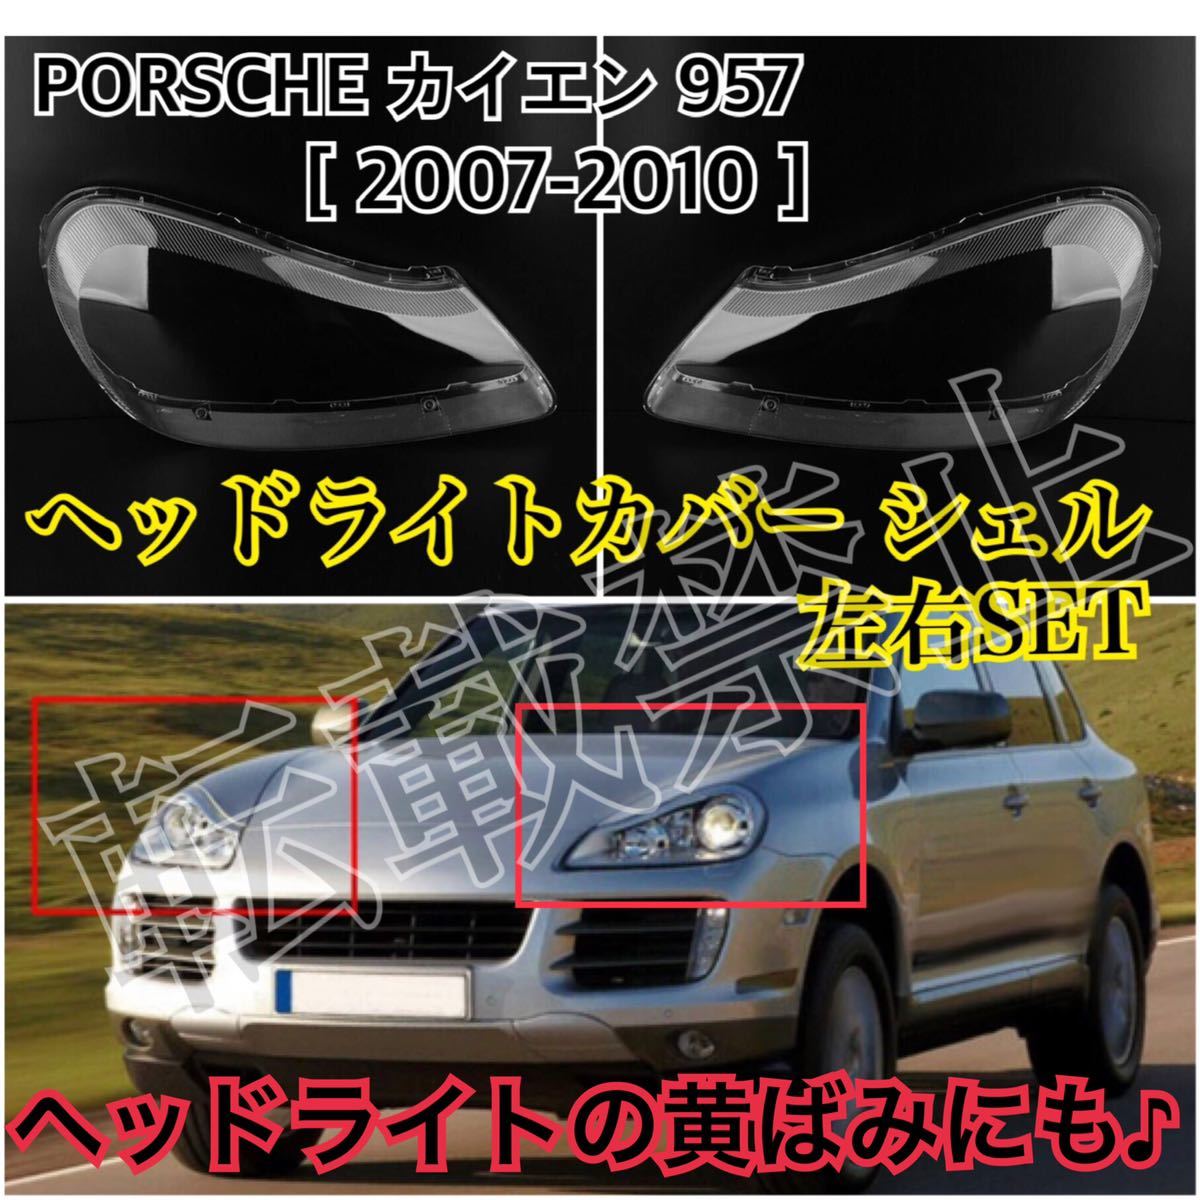  immediate payment * postage included *PORSCHE Cayenne 957 head light cover shell clear lens 2007-2010 year Porsche repair repair & yellow tint also! original exchange 